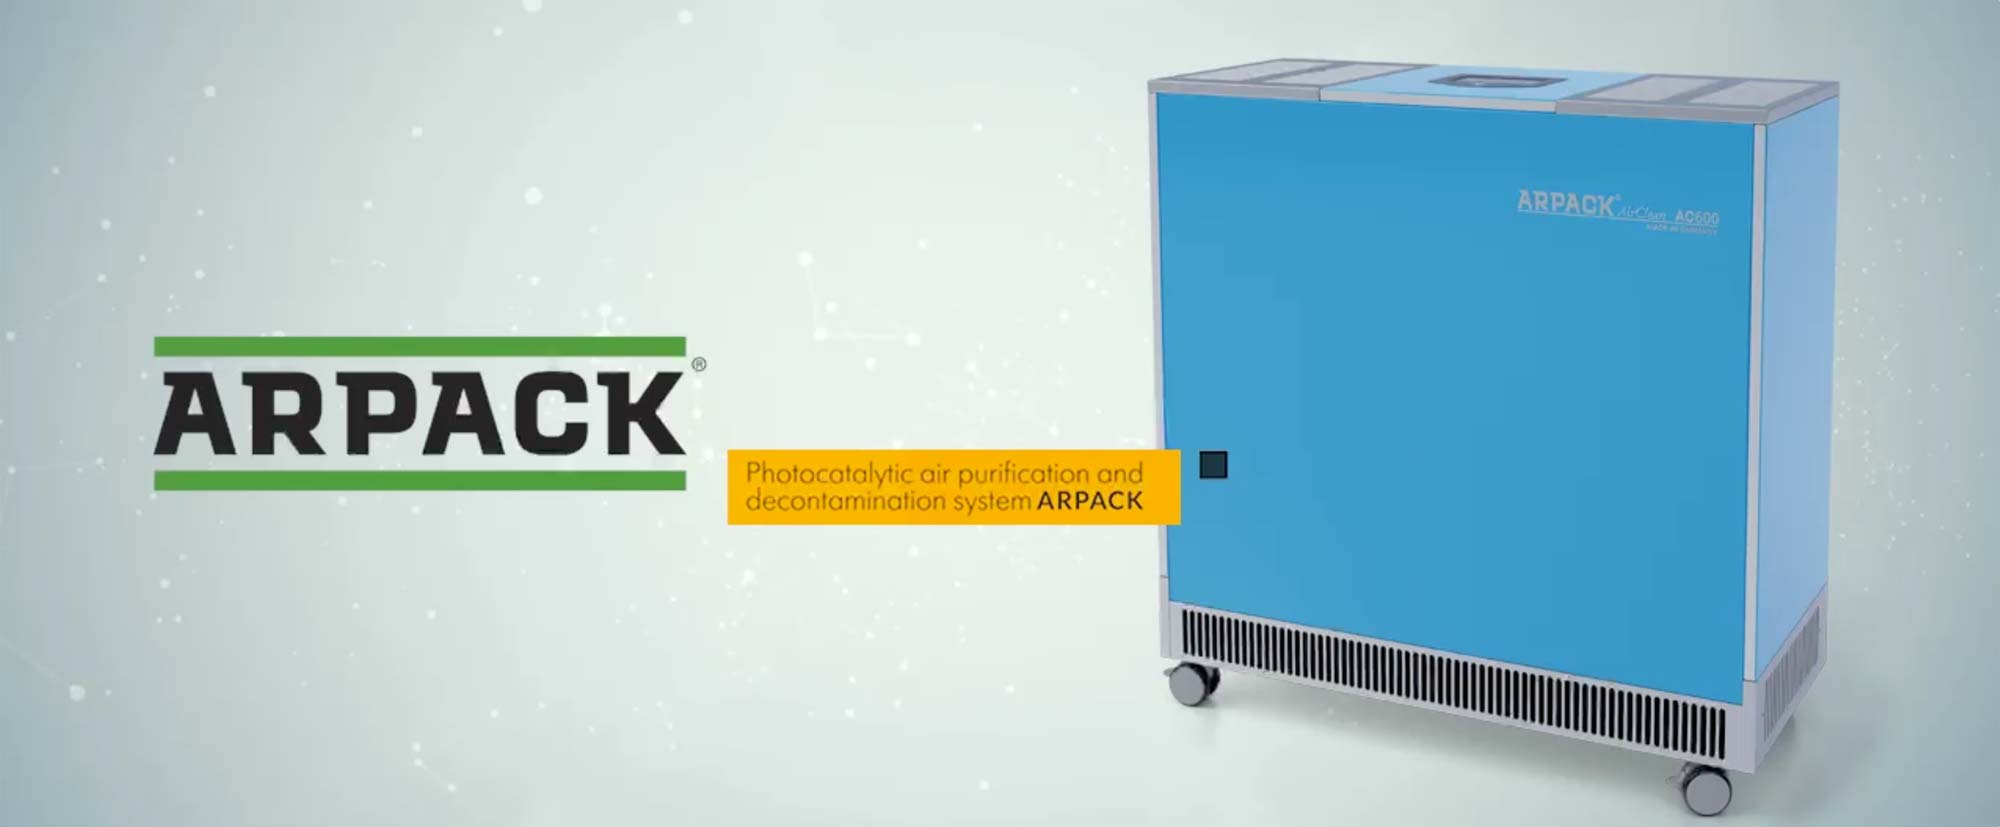 Technology of air purifiers with photocatalytic filter from ARPACK